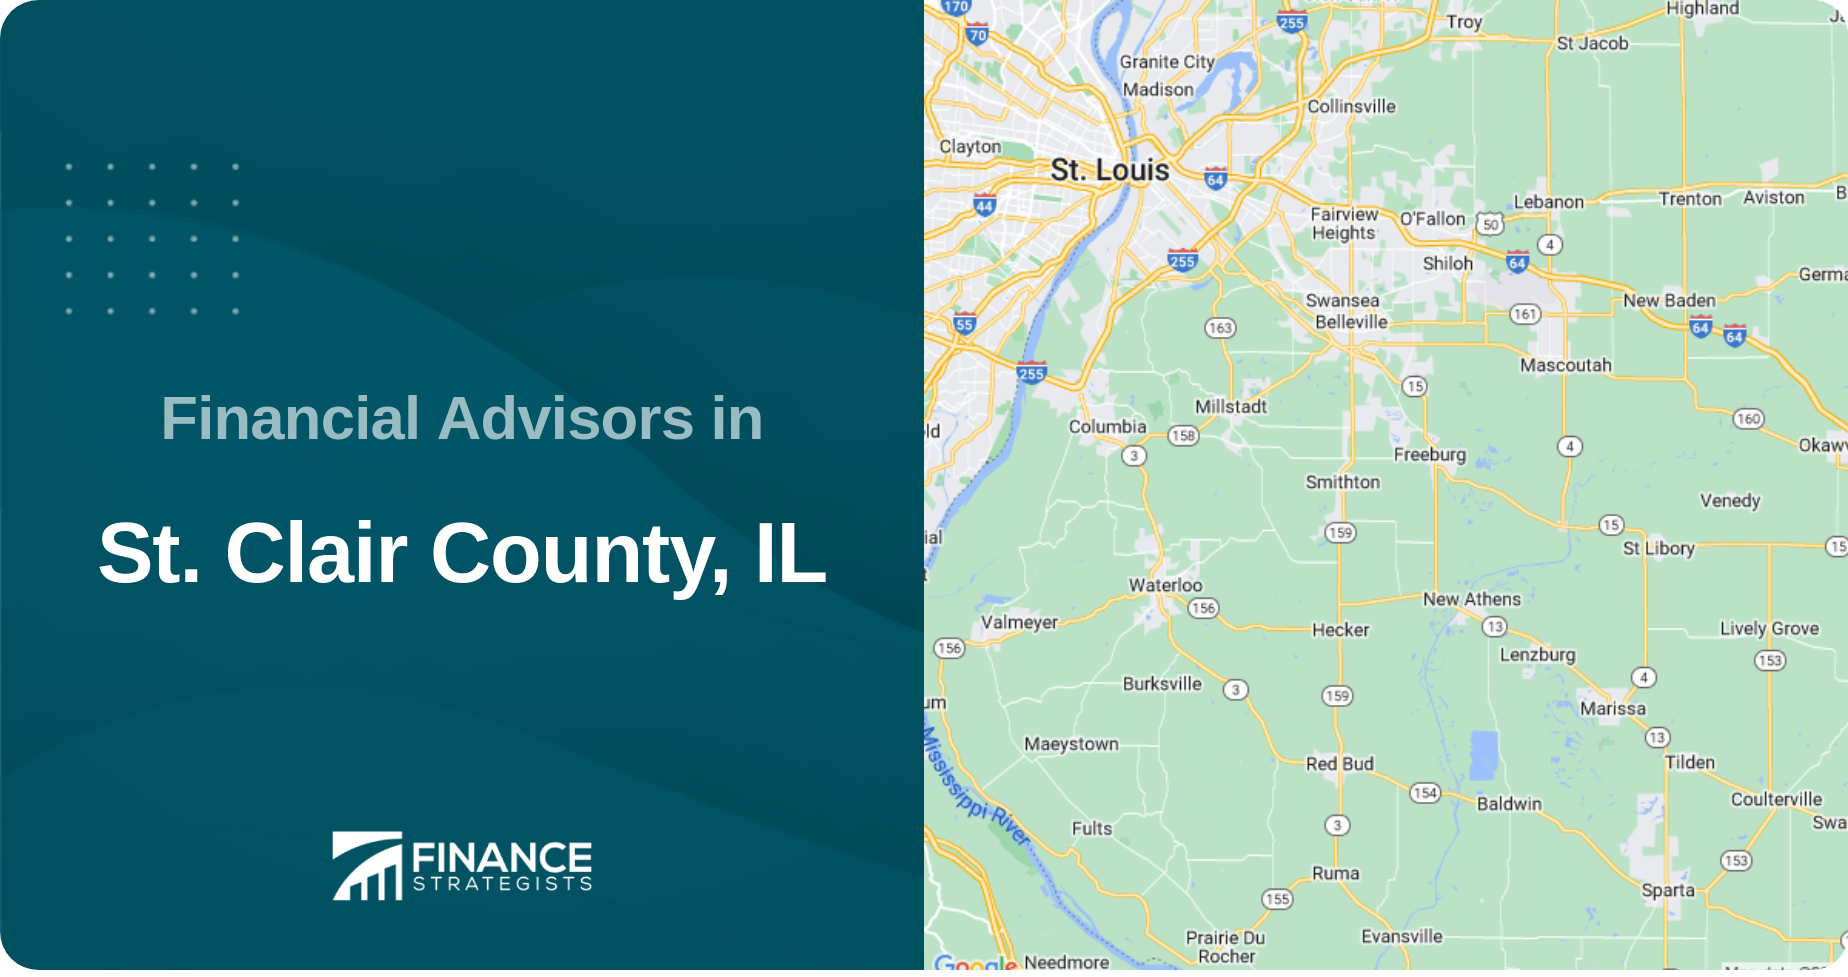 Financial Advisors in St. Clair County, IL